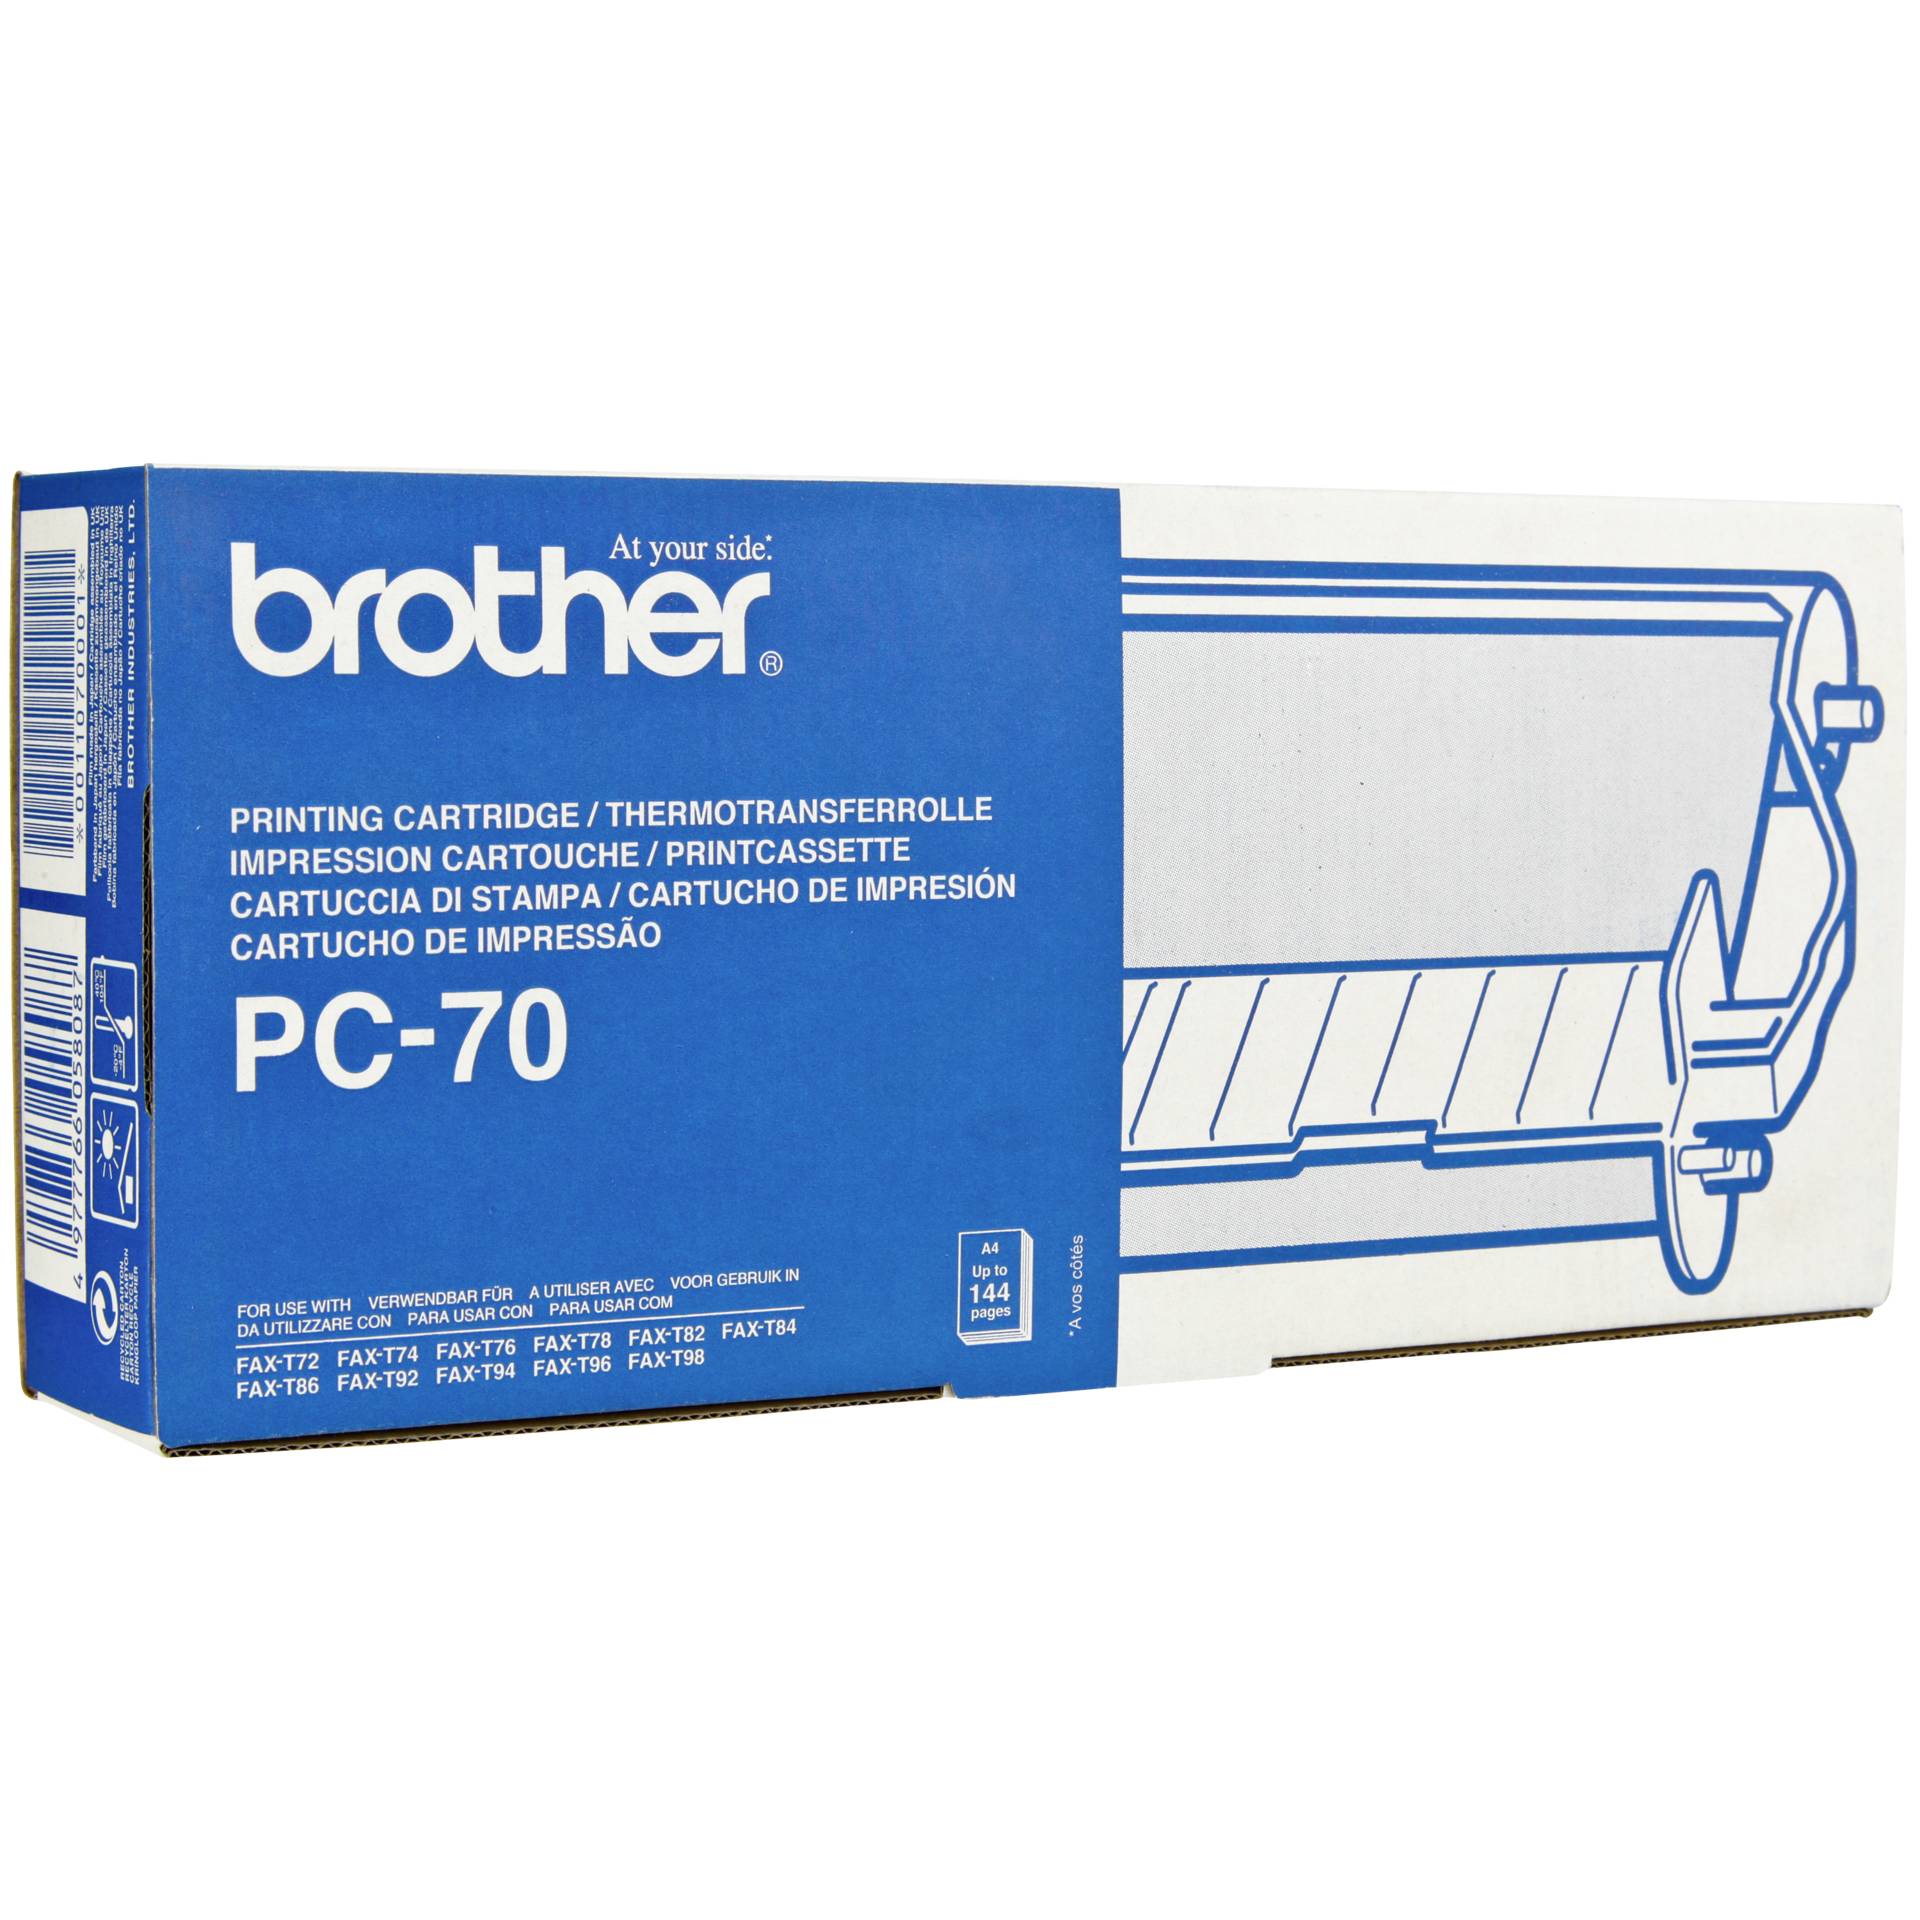 Brother PC 70 Cassette multiple incl. Nastro a trasf.termico